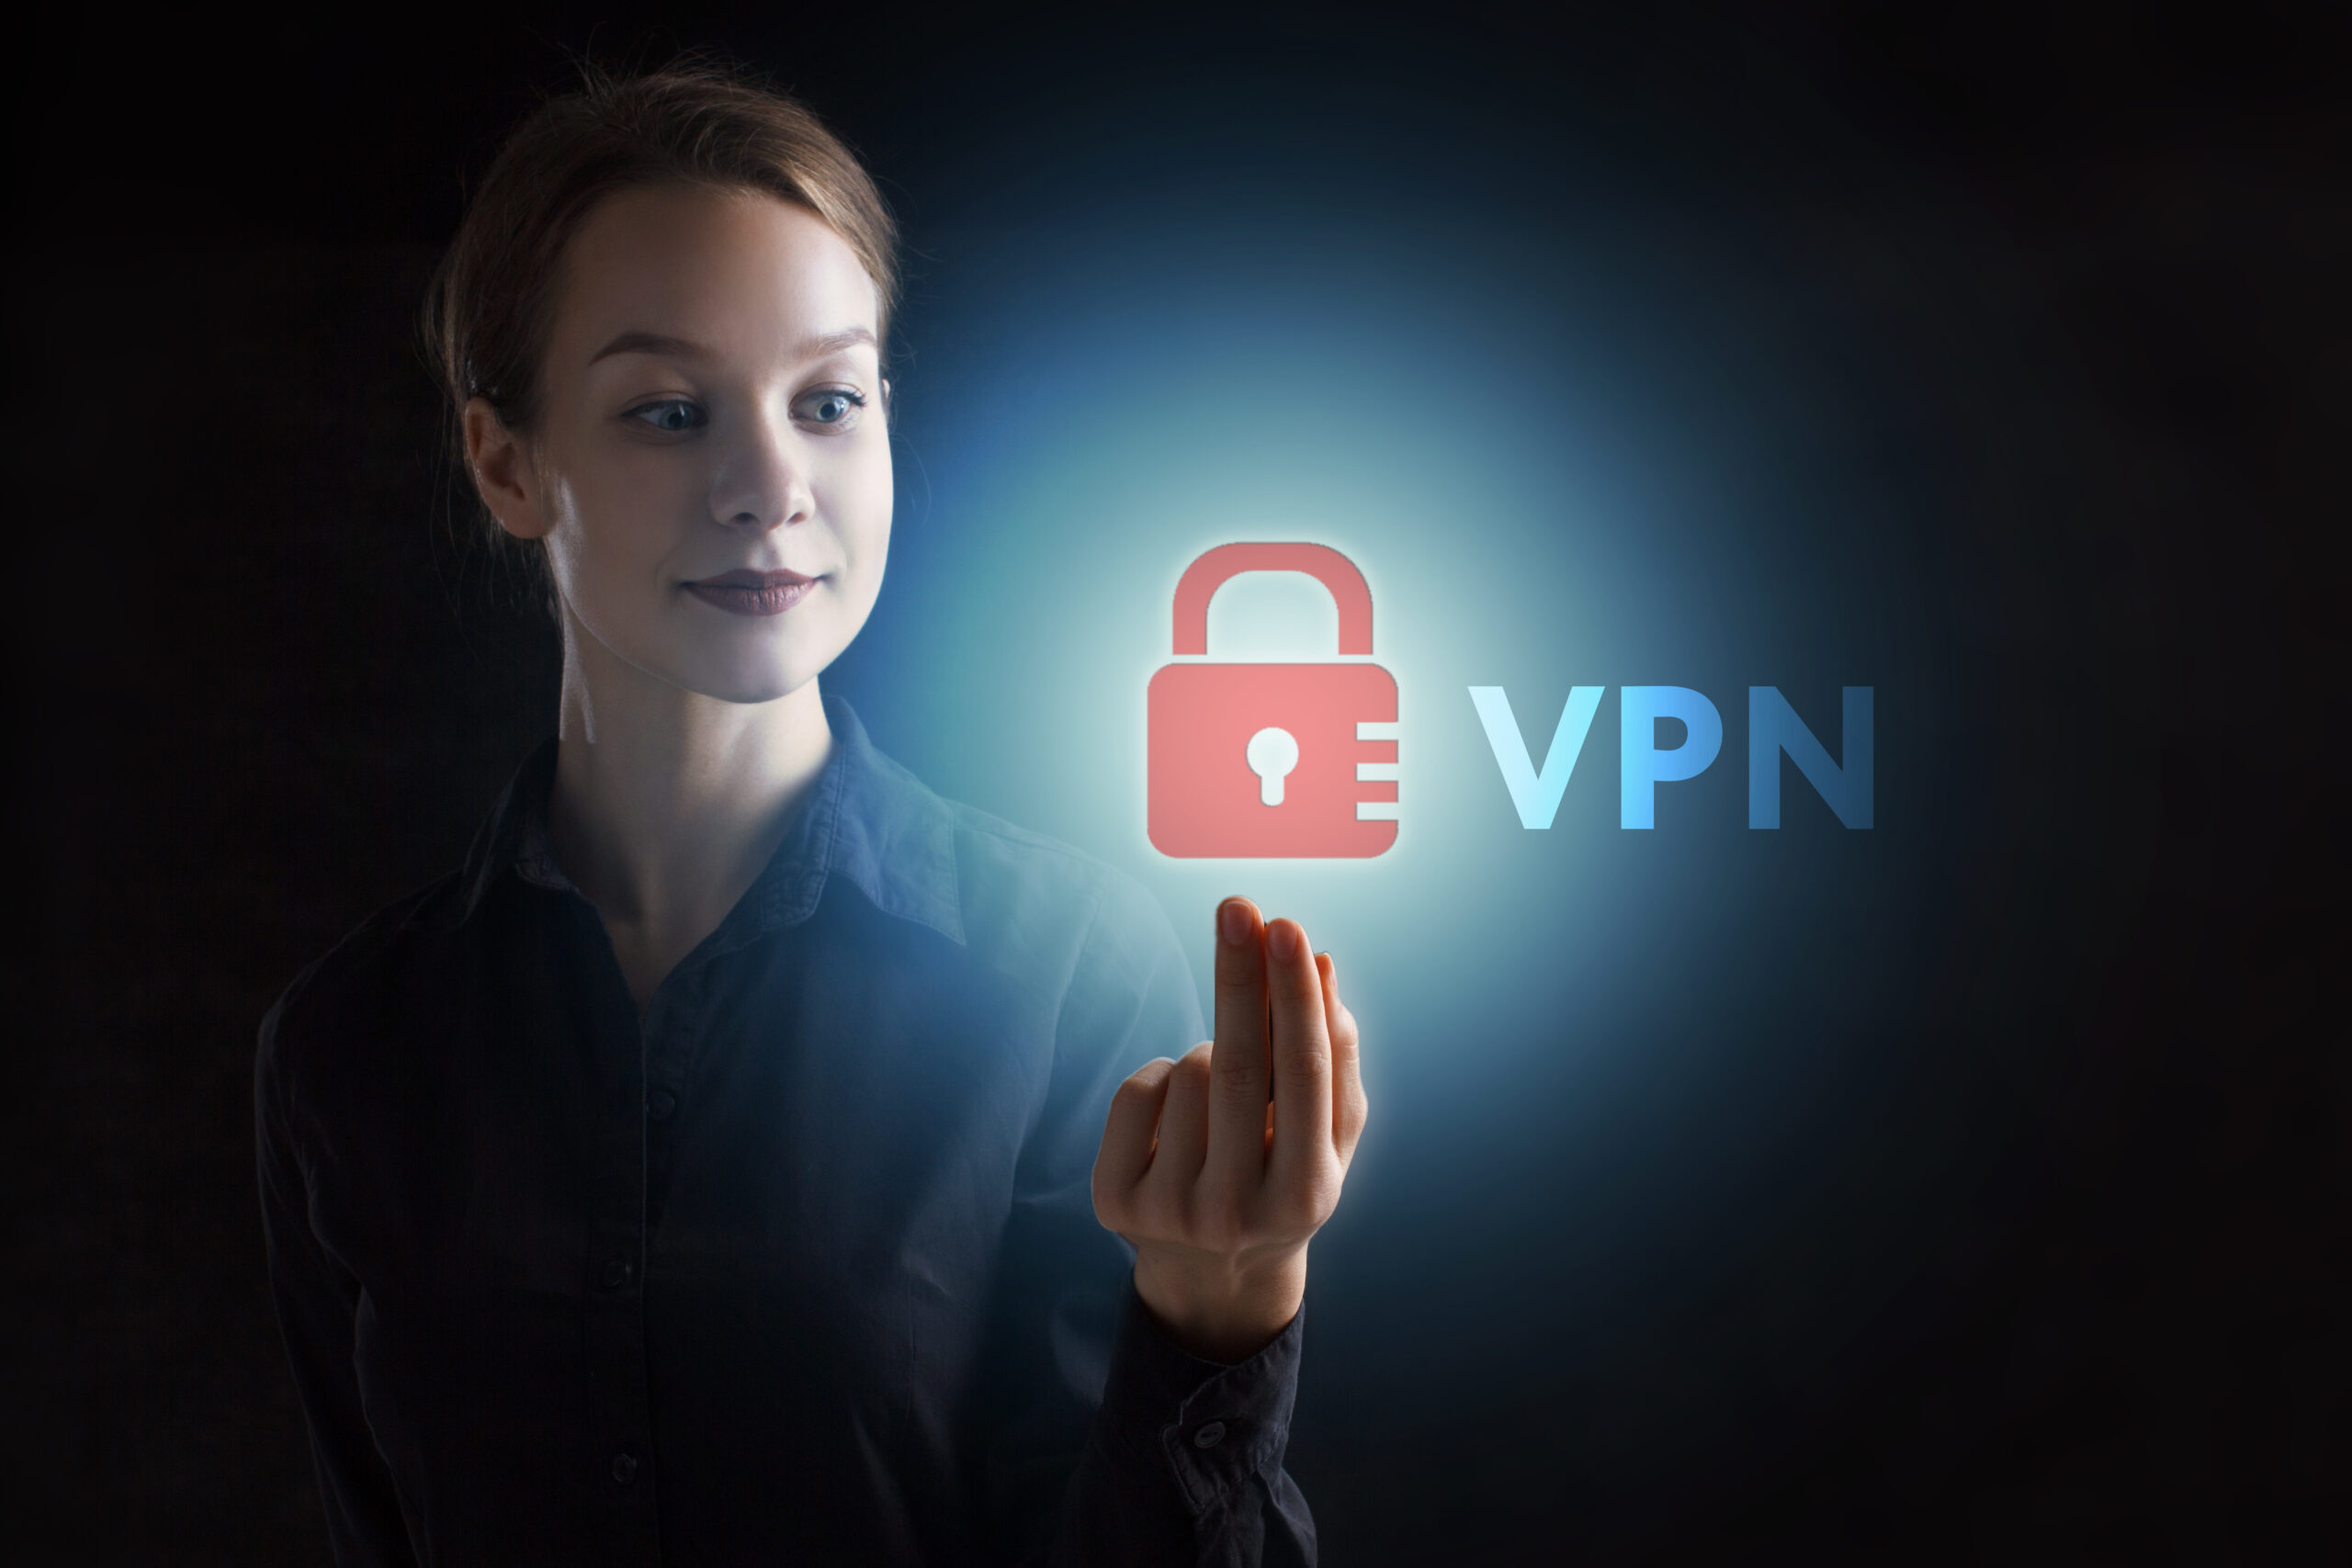 8. Don't Ignore VPN Protections